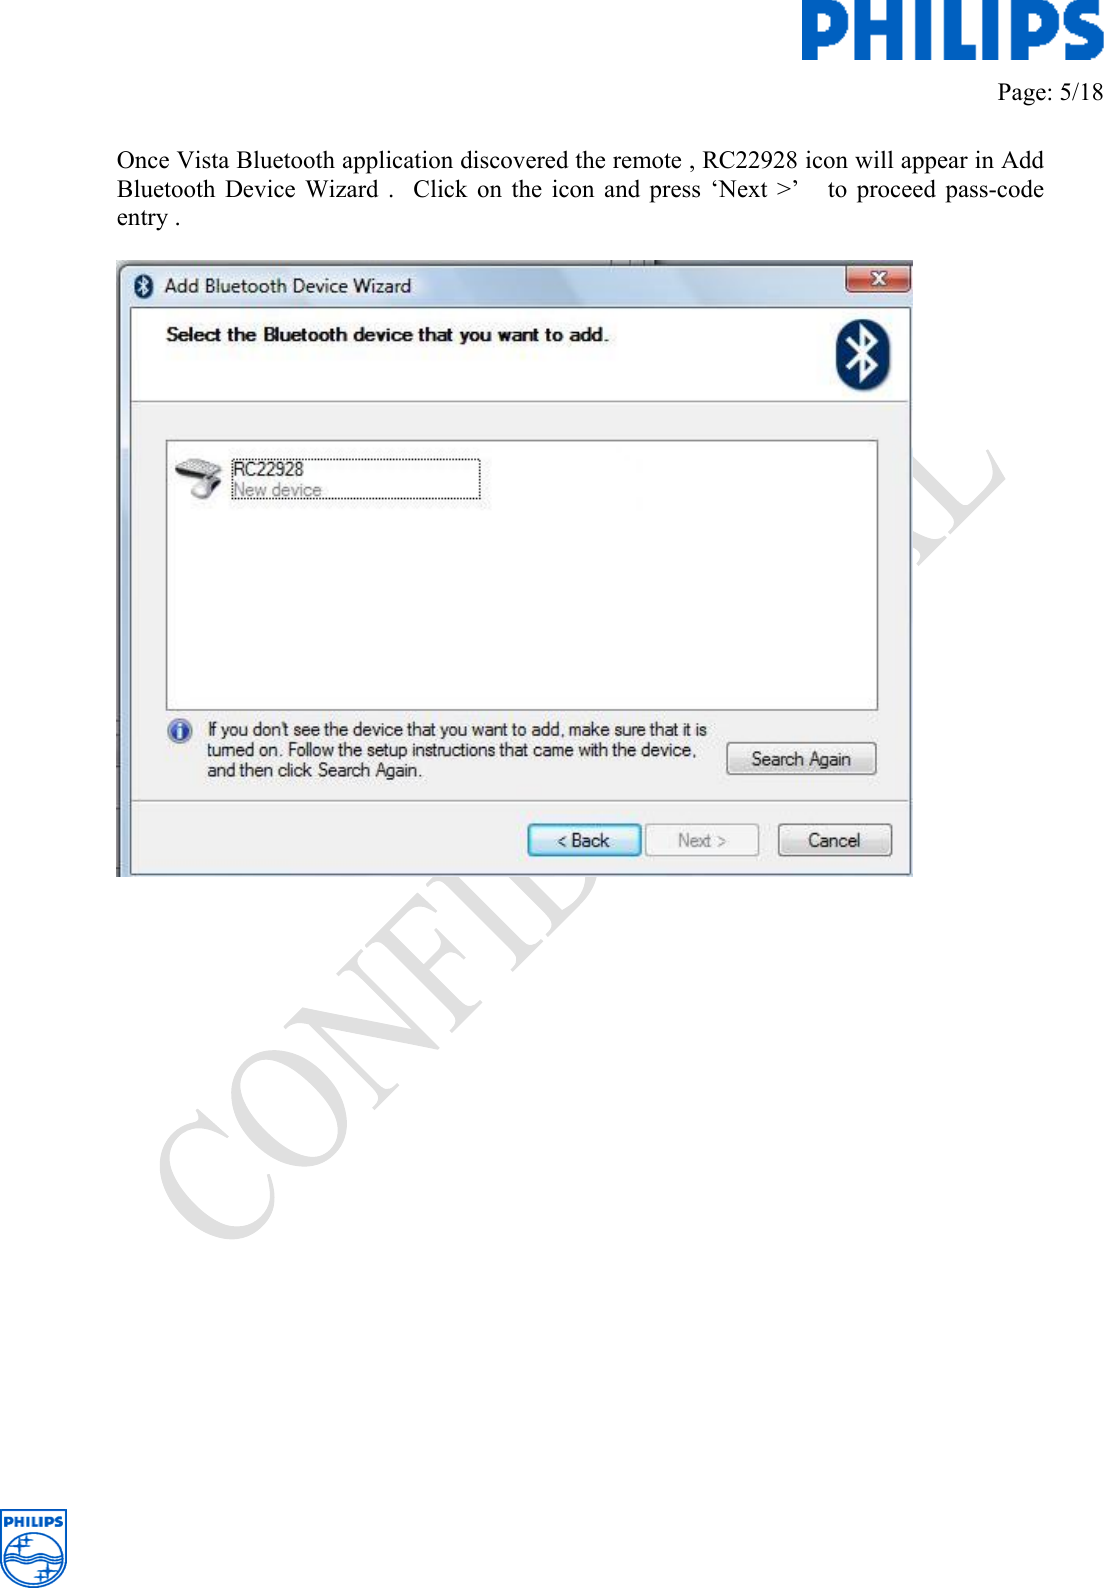         Page: 5/18   Once Vista Bluetooth application discovered the remote , RC22928 icon will appear in Add Bluetooth Device Wizard .  Click on the icon and press ‘Next &gt;’   to proceed pass-code entry .                         